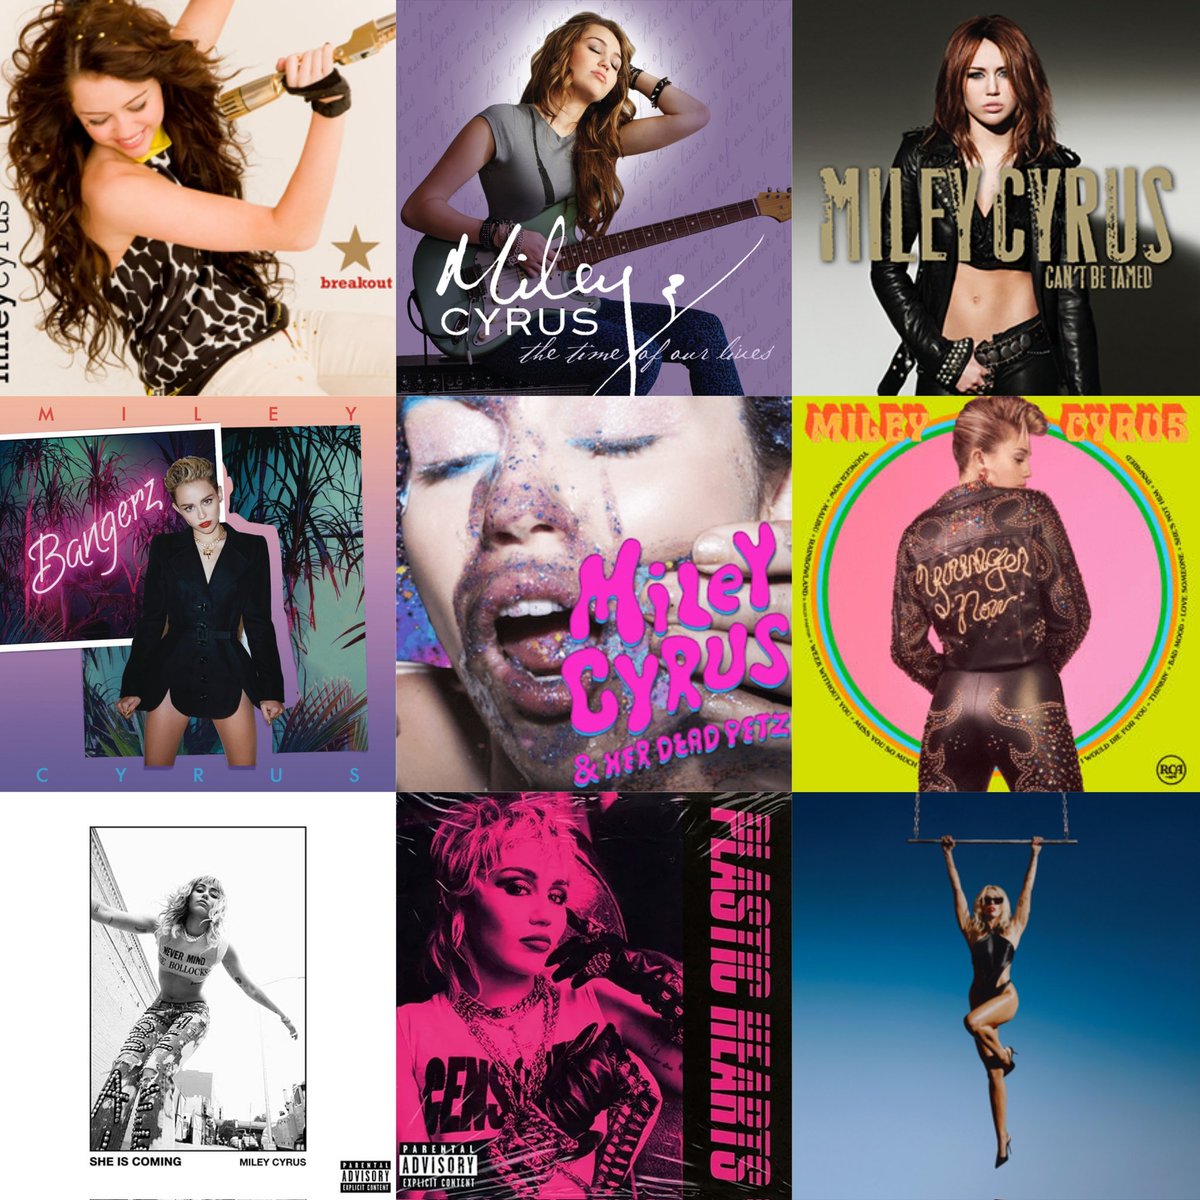 Miley Cyrus discography - Wikipedia